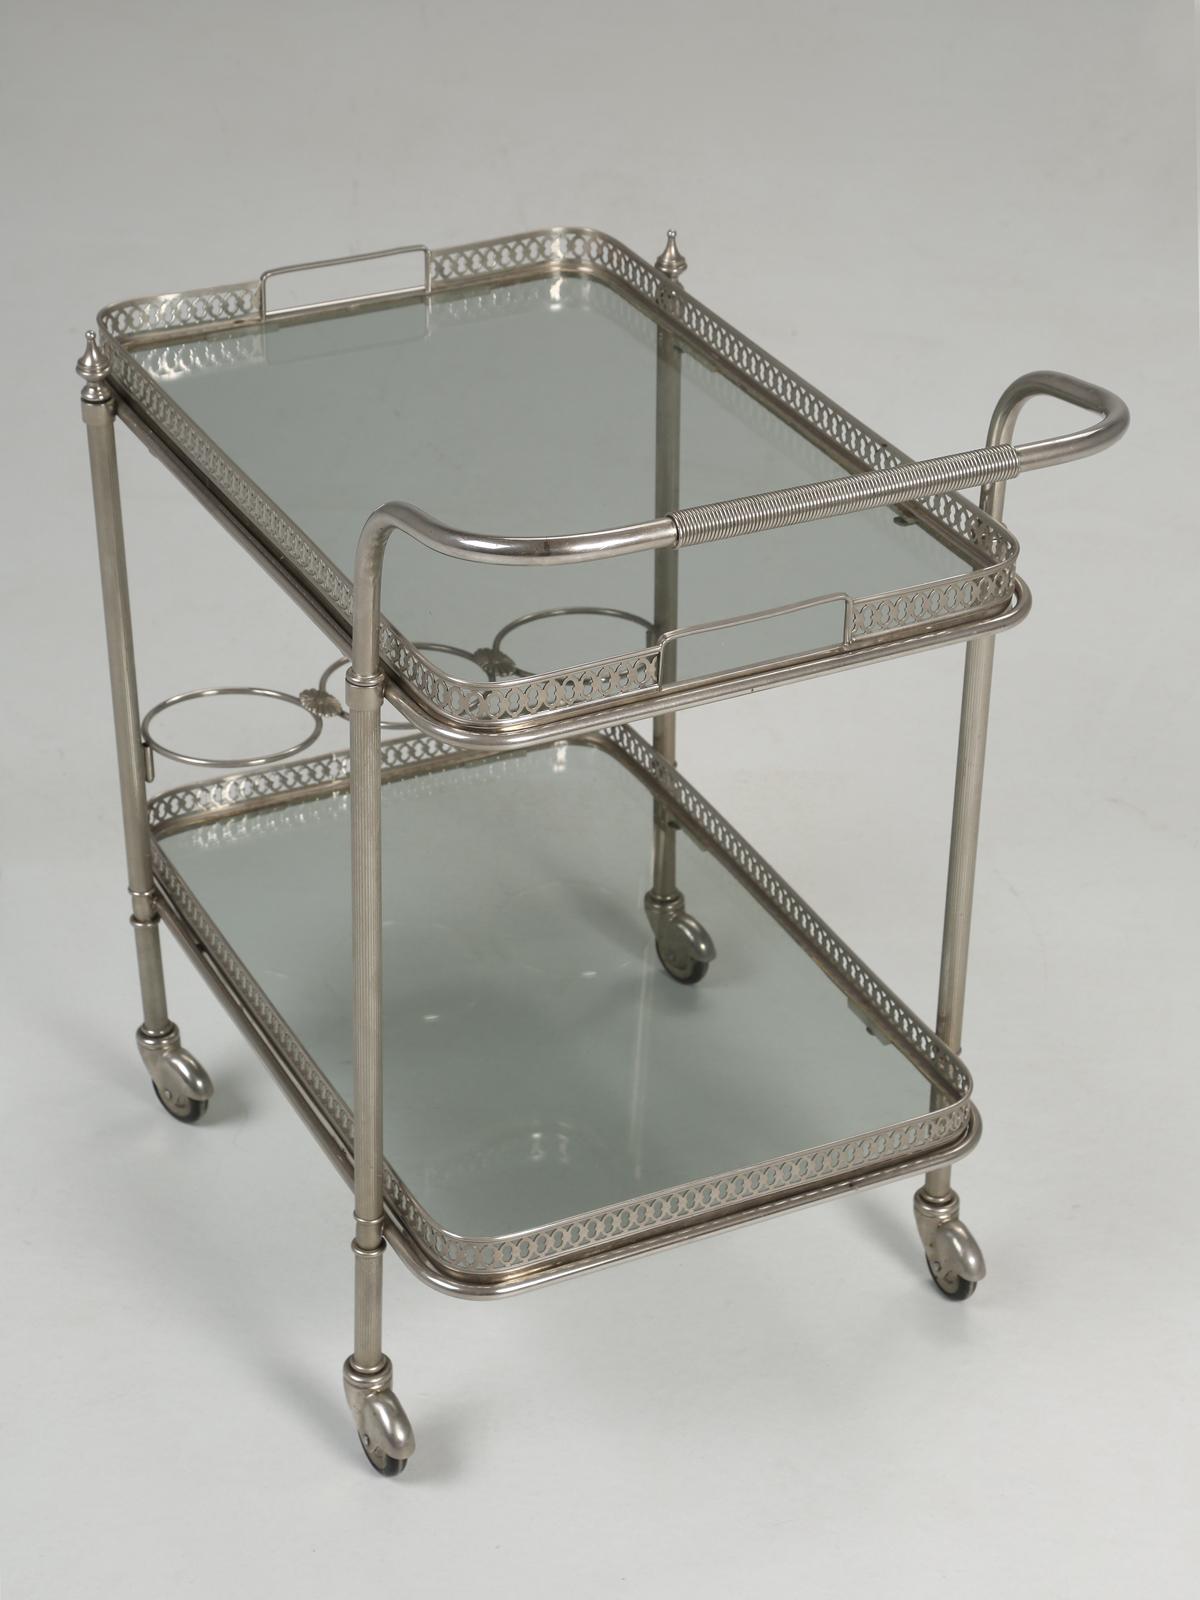 Plated Vintage Bar Cart Mid-Century Modern Imported from France with Removable Trays